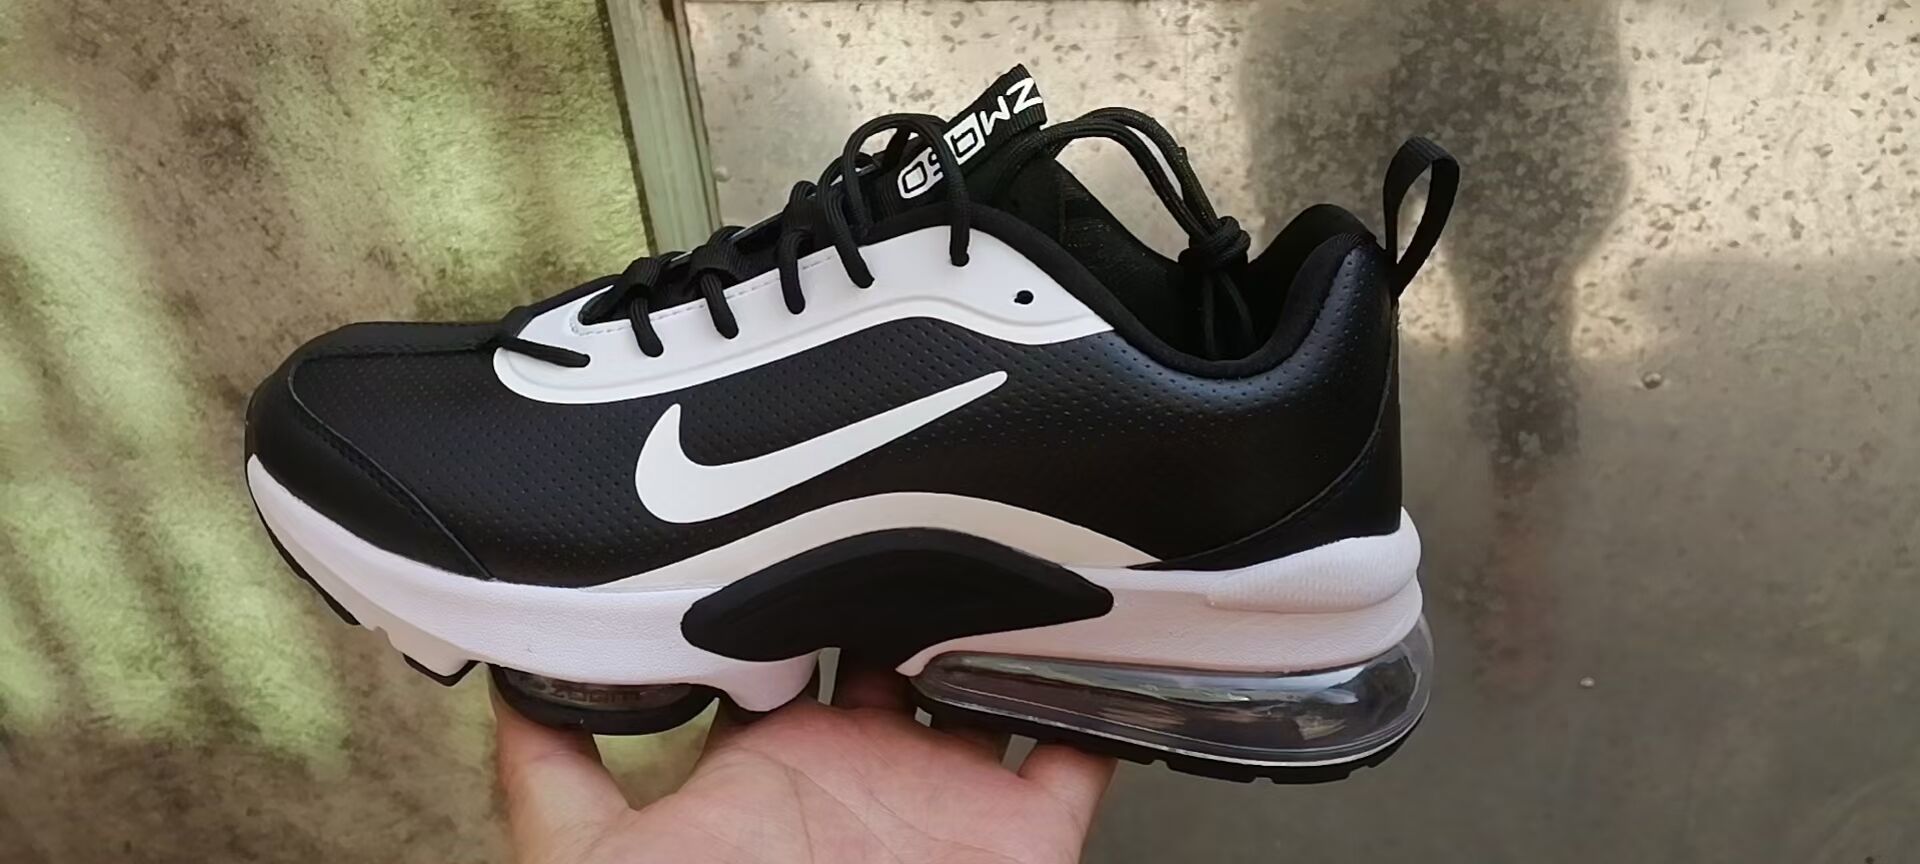 Nike Air Max 950 Leather Black White Shoes